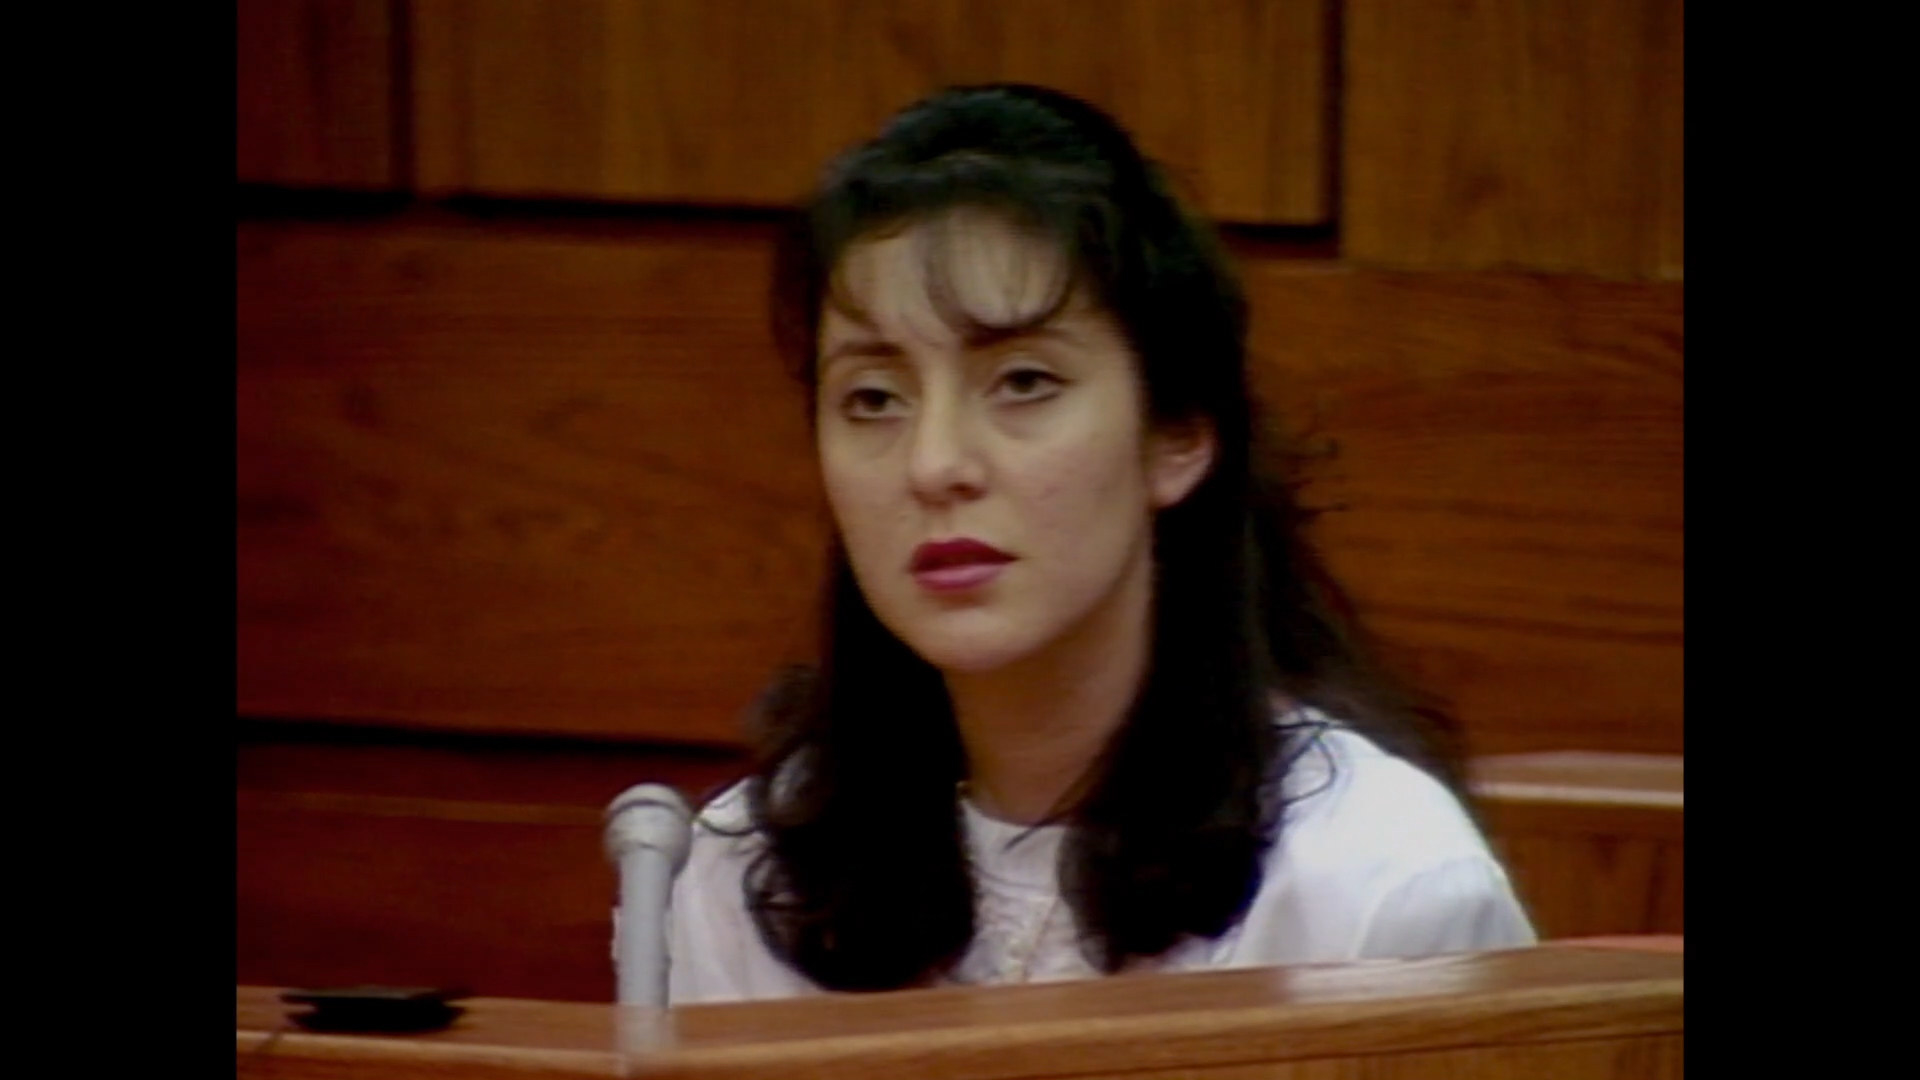 A still Of Lorena Bobbitt in court from the series Lorena